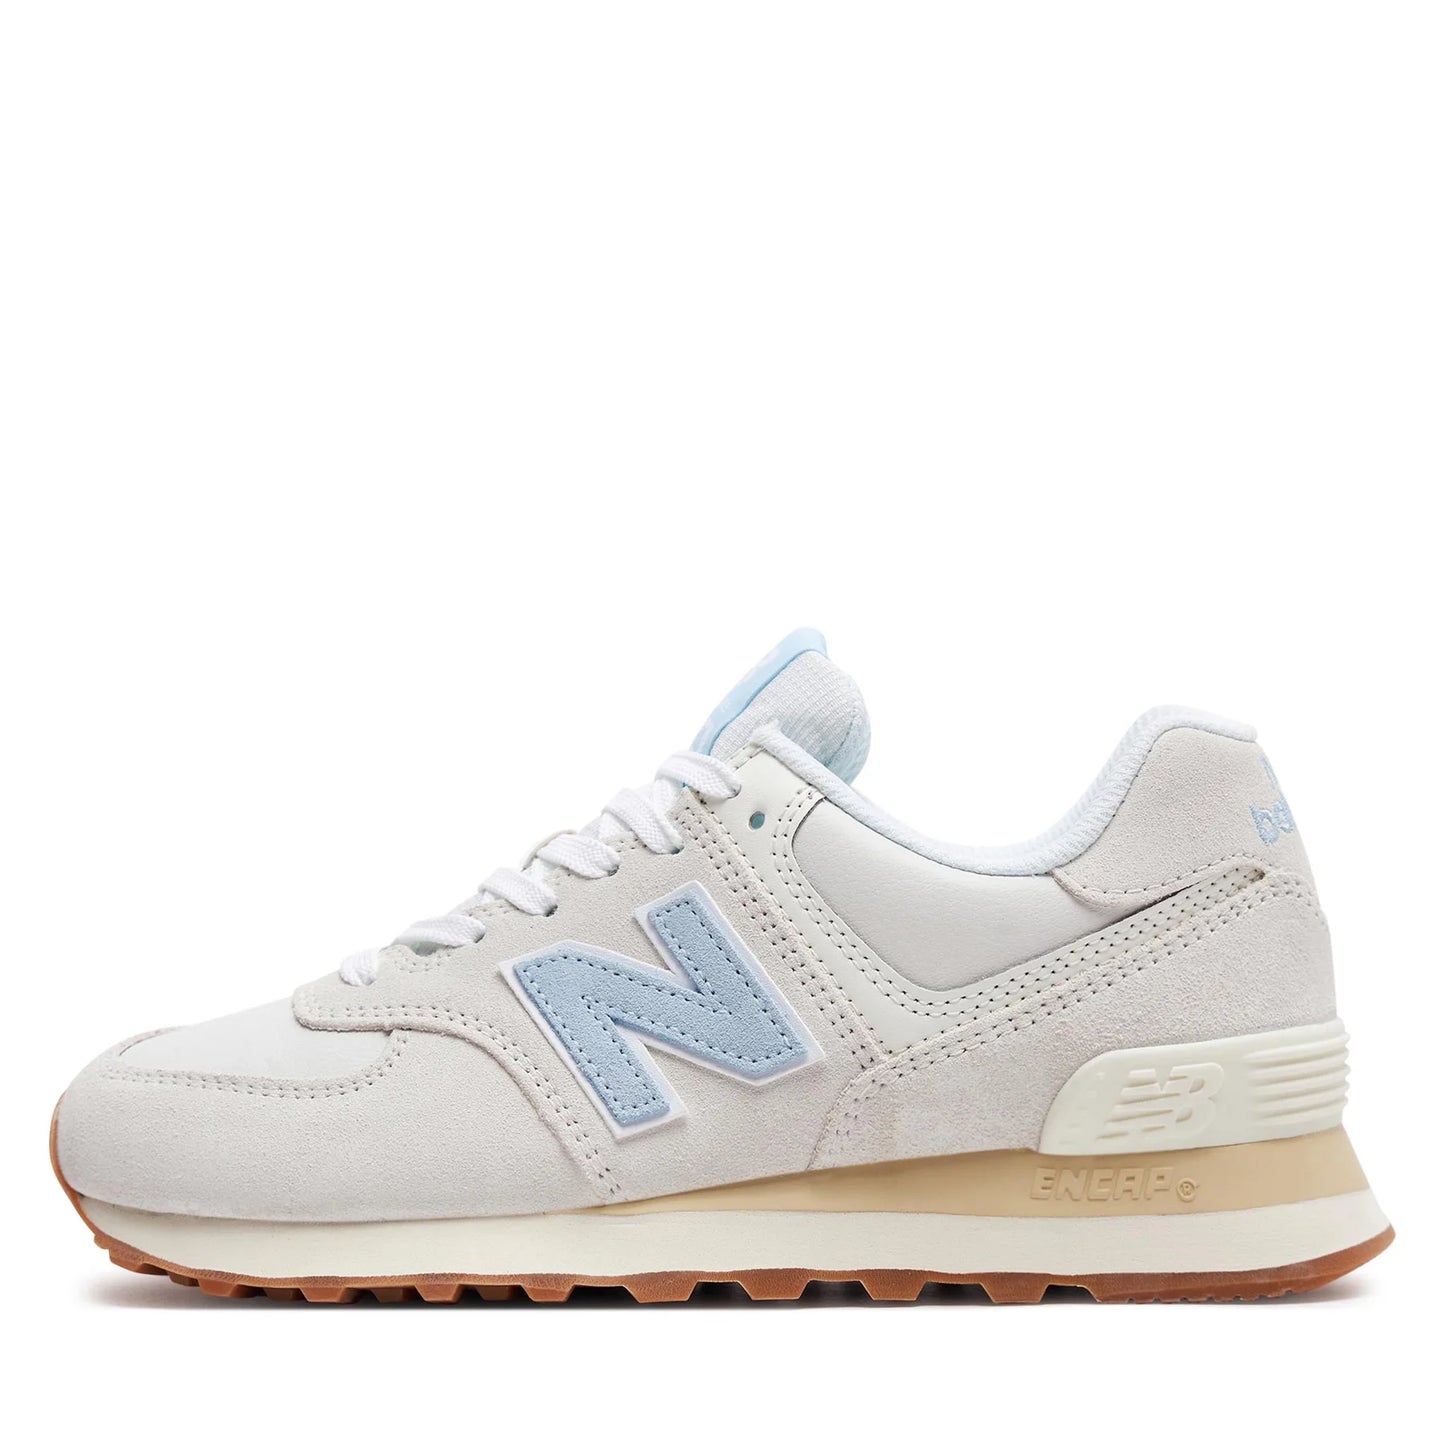 NEW BALANCE | SNEAKERS MUJER | 574 REFLECTION | BLANCO